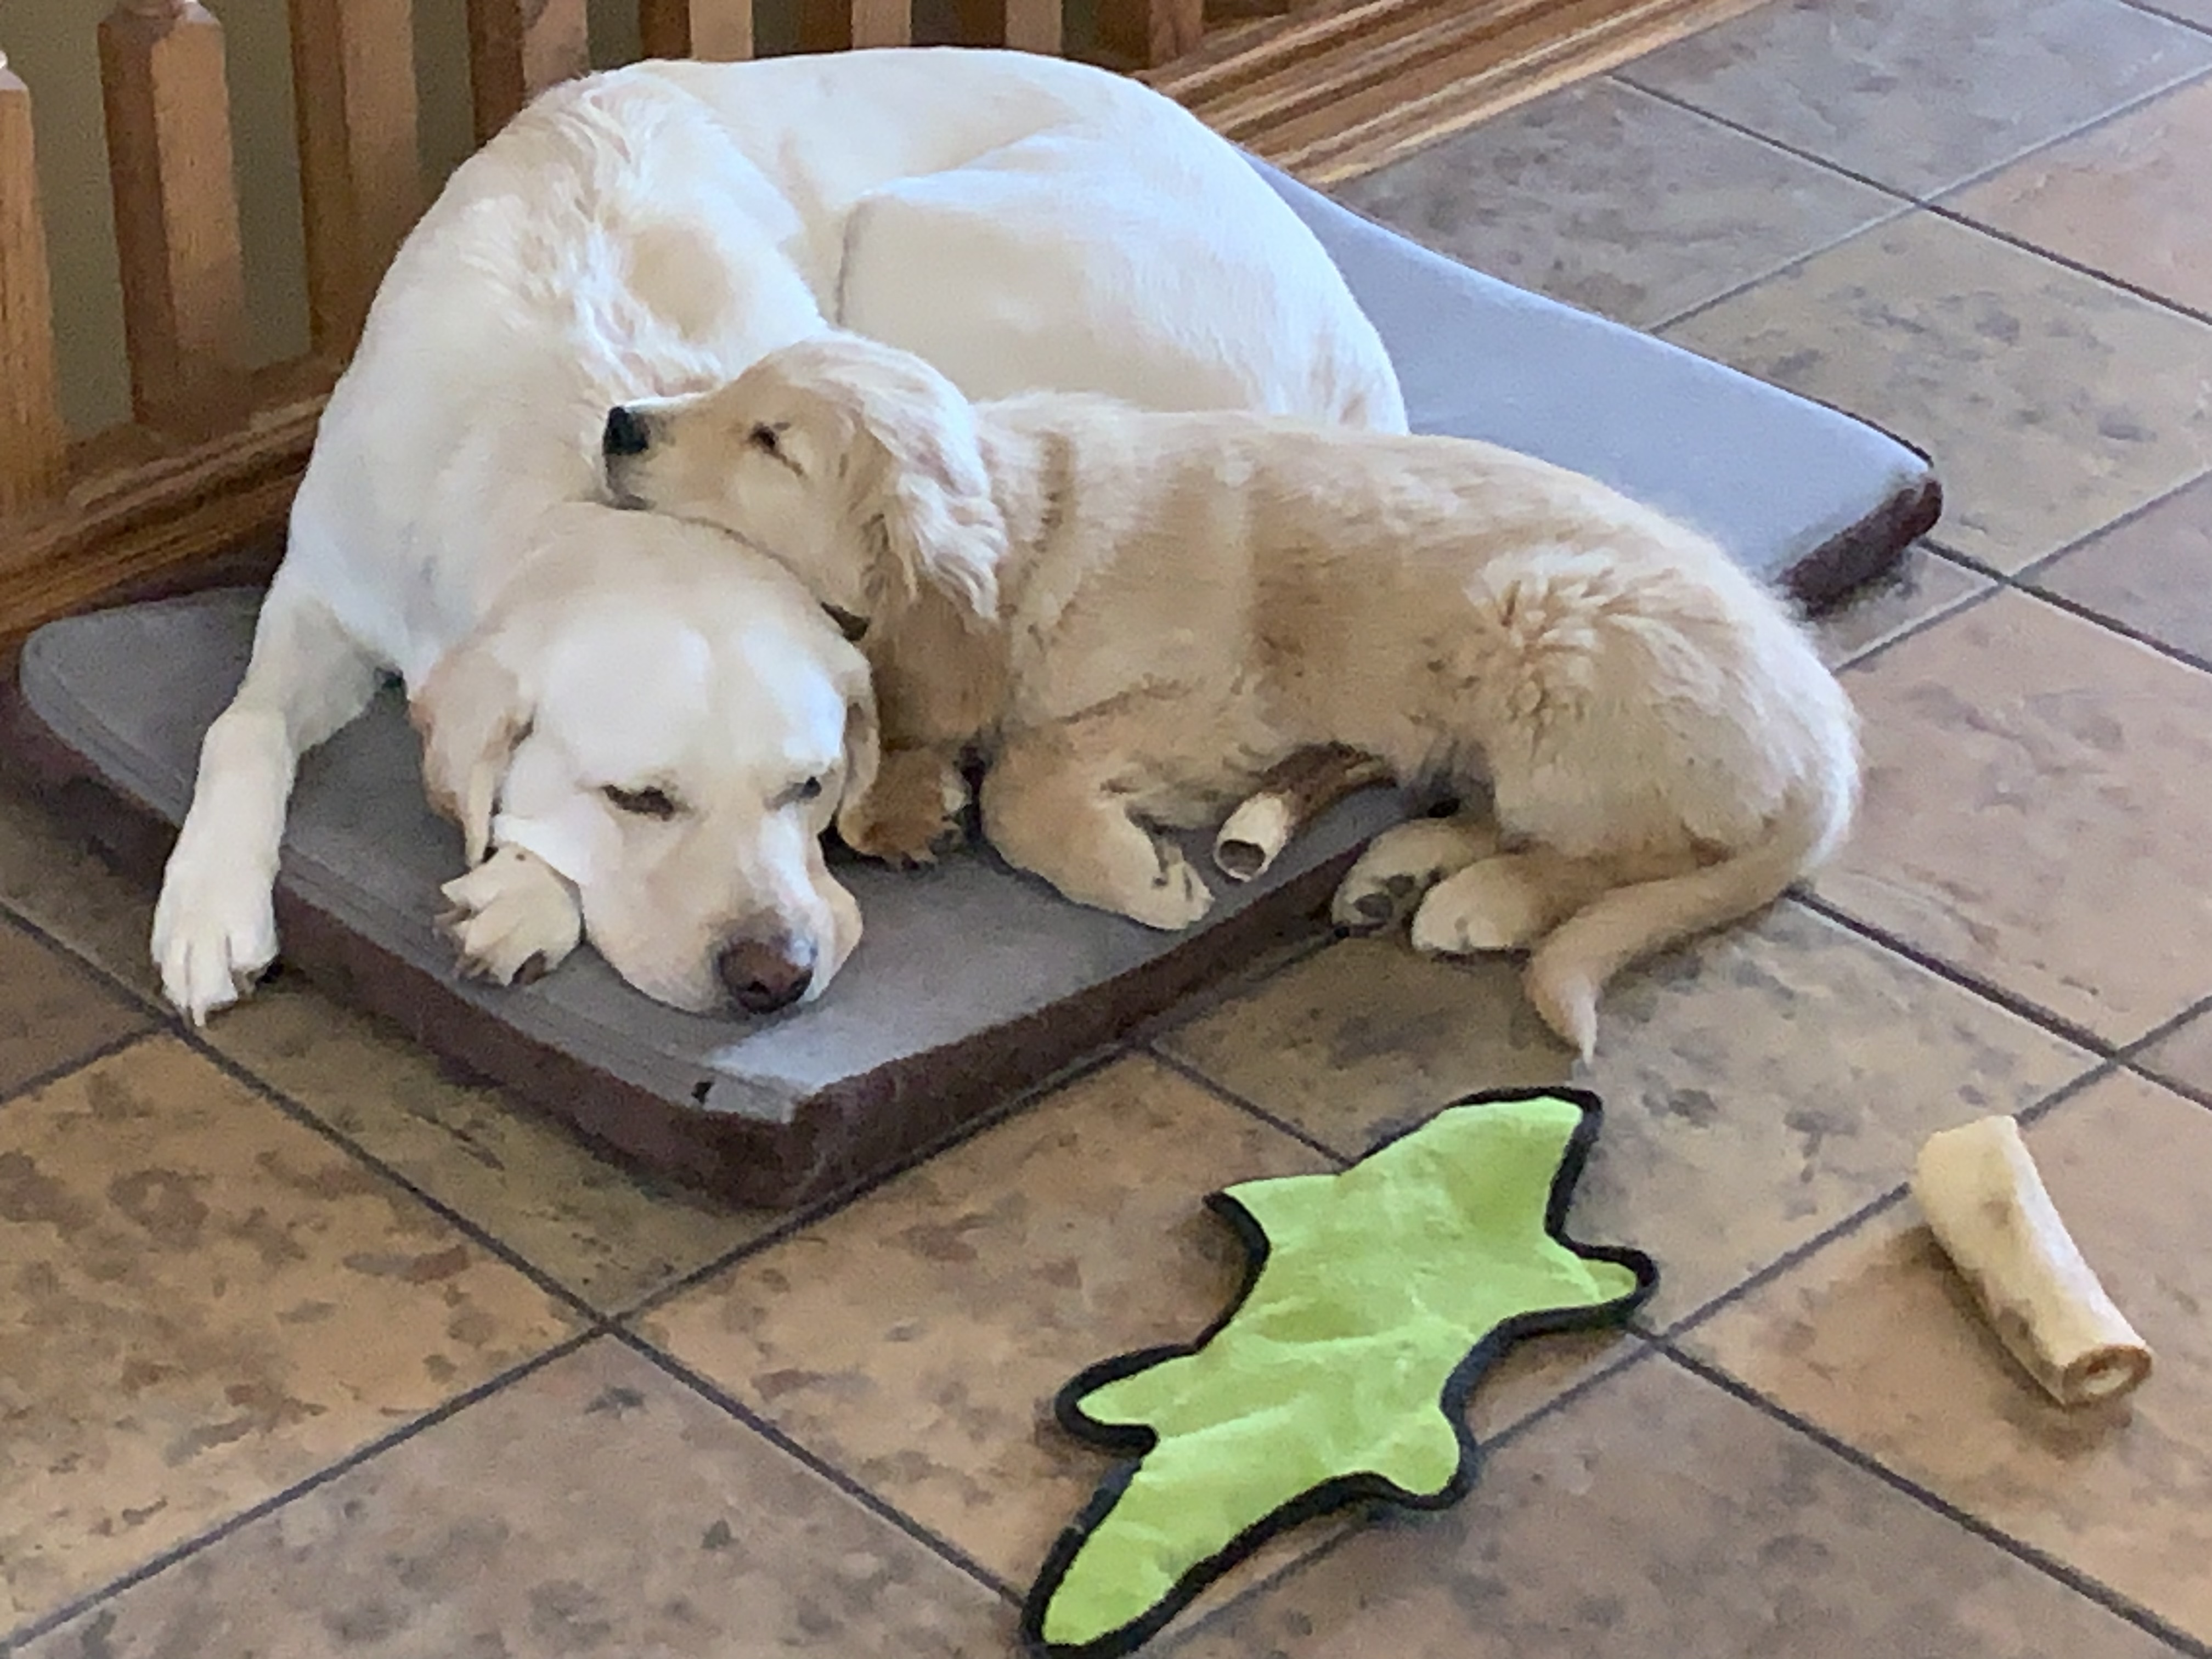 Photo of Dave, a Yellow Labrador Retriever, and Clancy, a Golden Retriever pup, catching some zzz’s on a mat on a sunlit tile floor. Favorite toys lie strewn on the floor next to the mat.